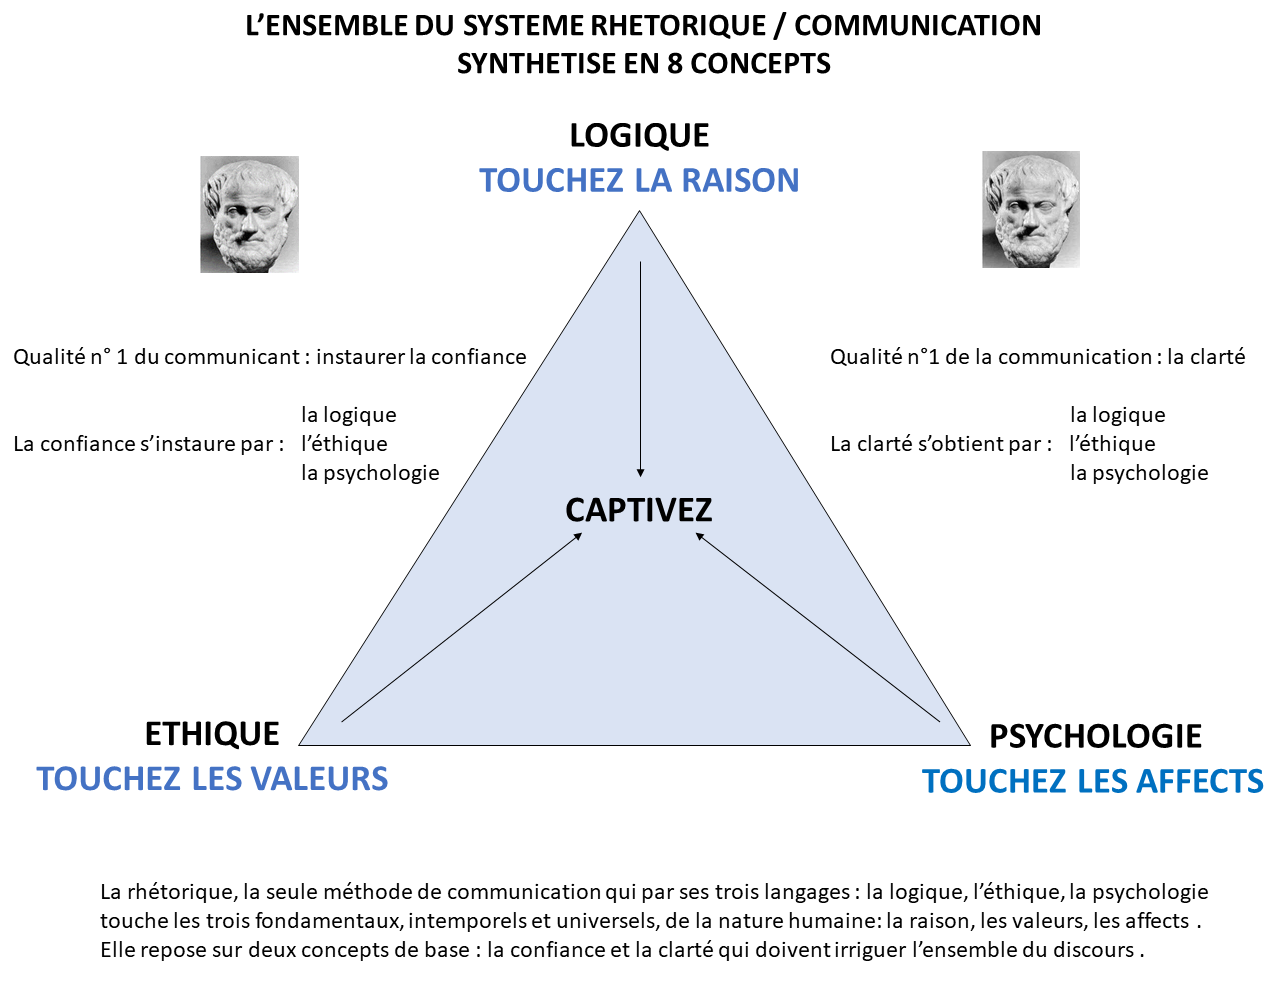 You are currently viewing NOUVELLE VERSION, ULTRA SYNTHETIQUE, DU TRIANGLE RHETORIQUE / COMMUNICATION